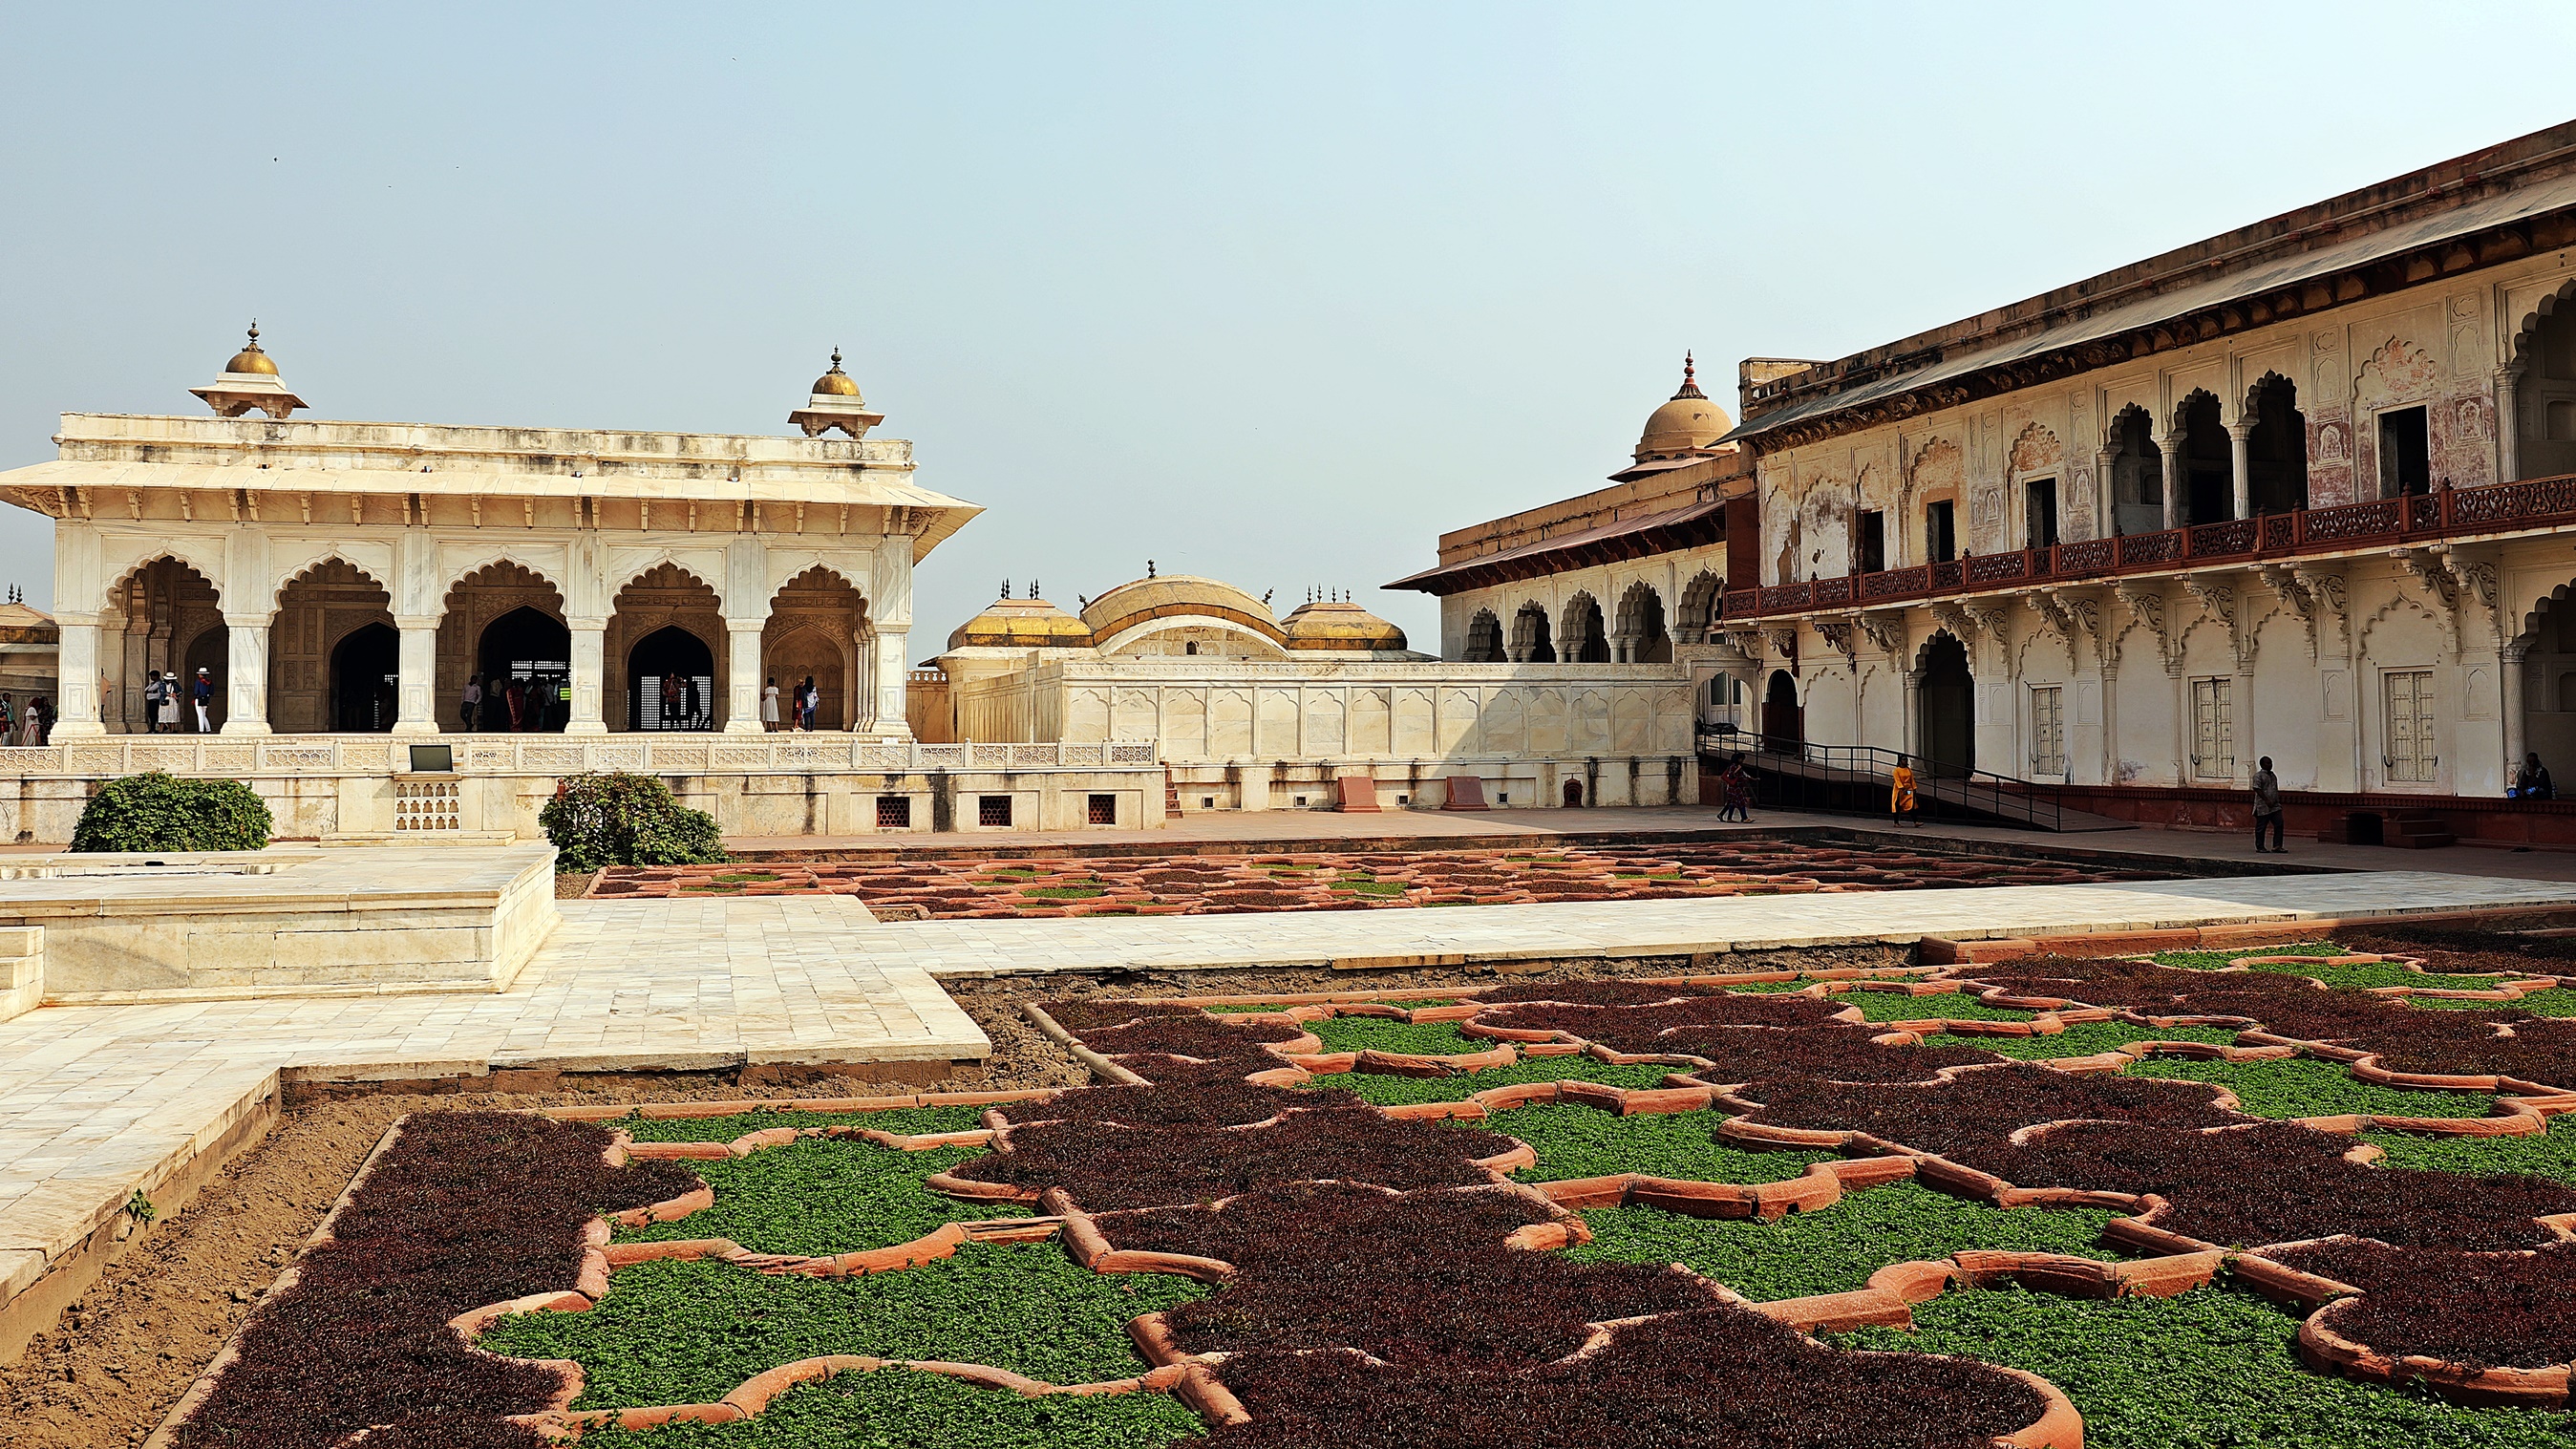 The palace in Agra Fort